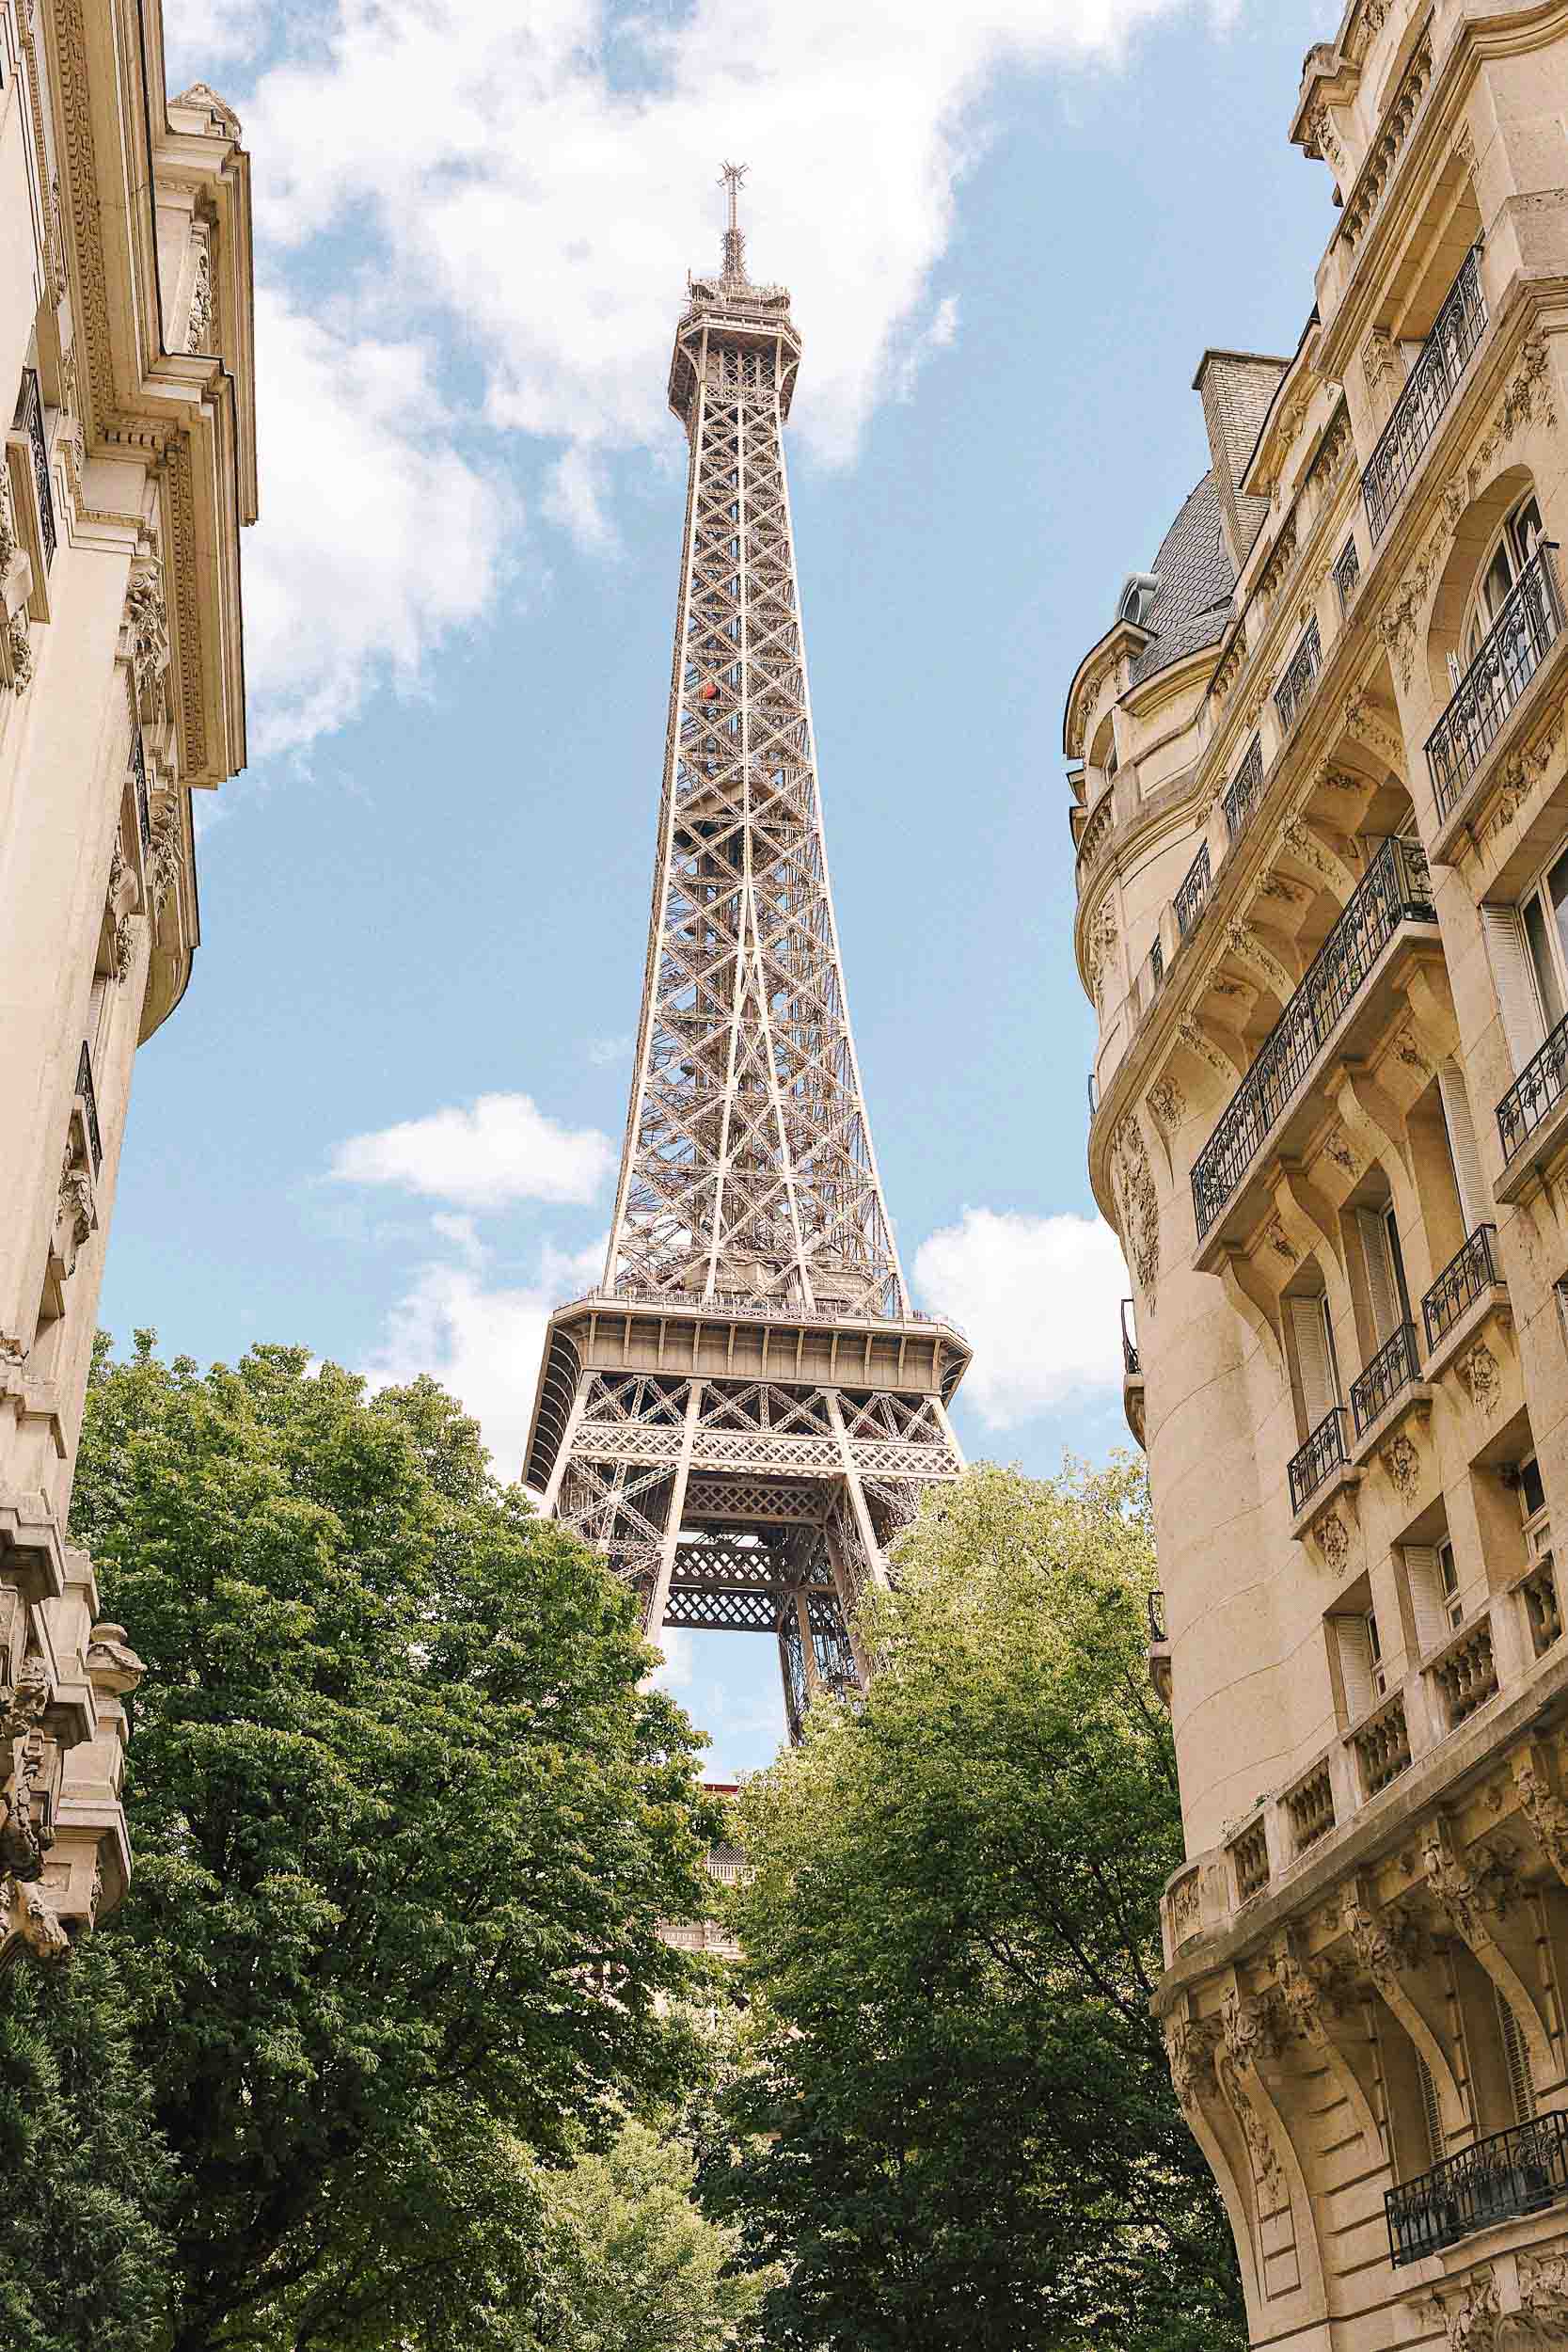 A guide to Paris sights you should not miss